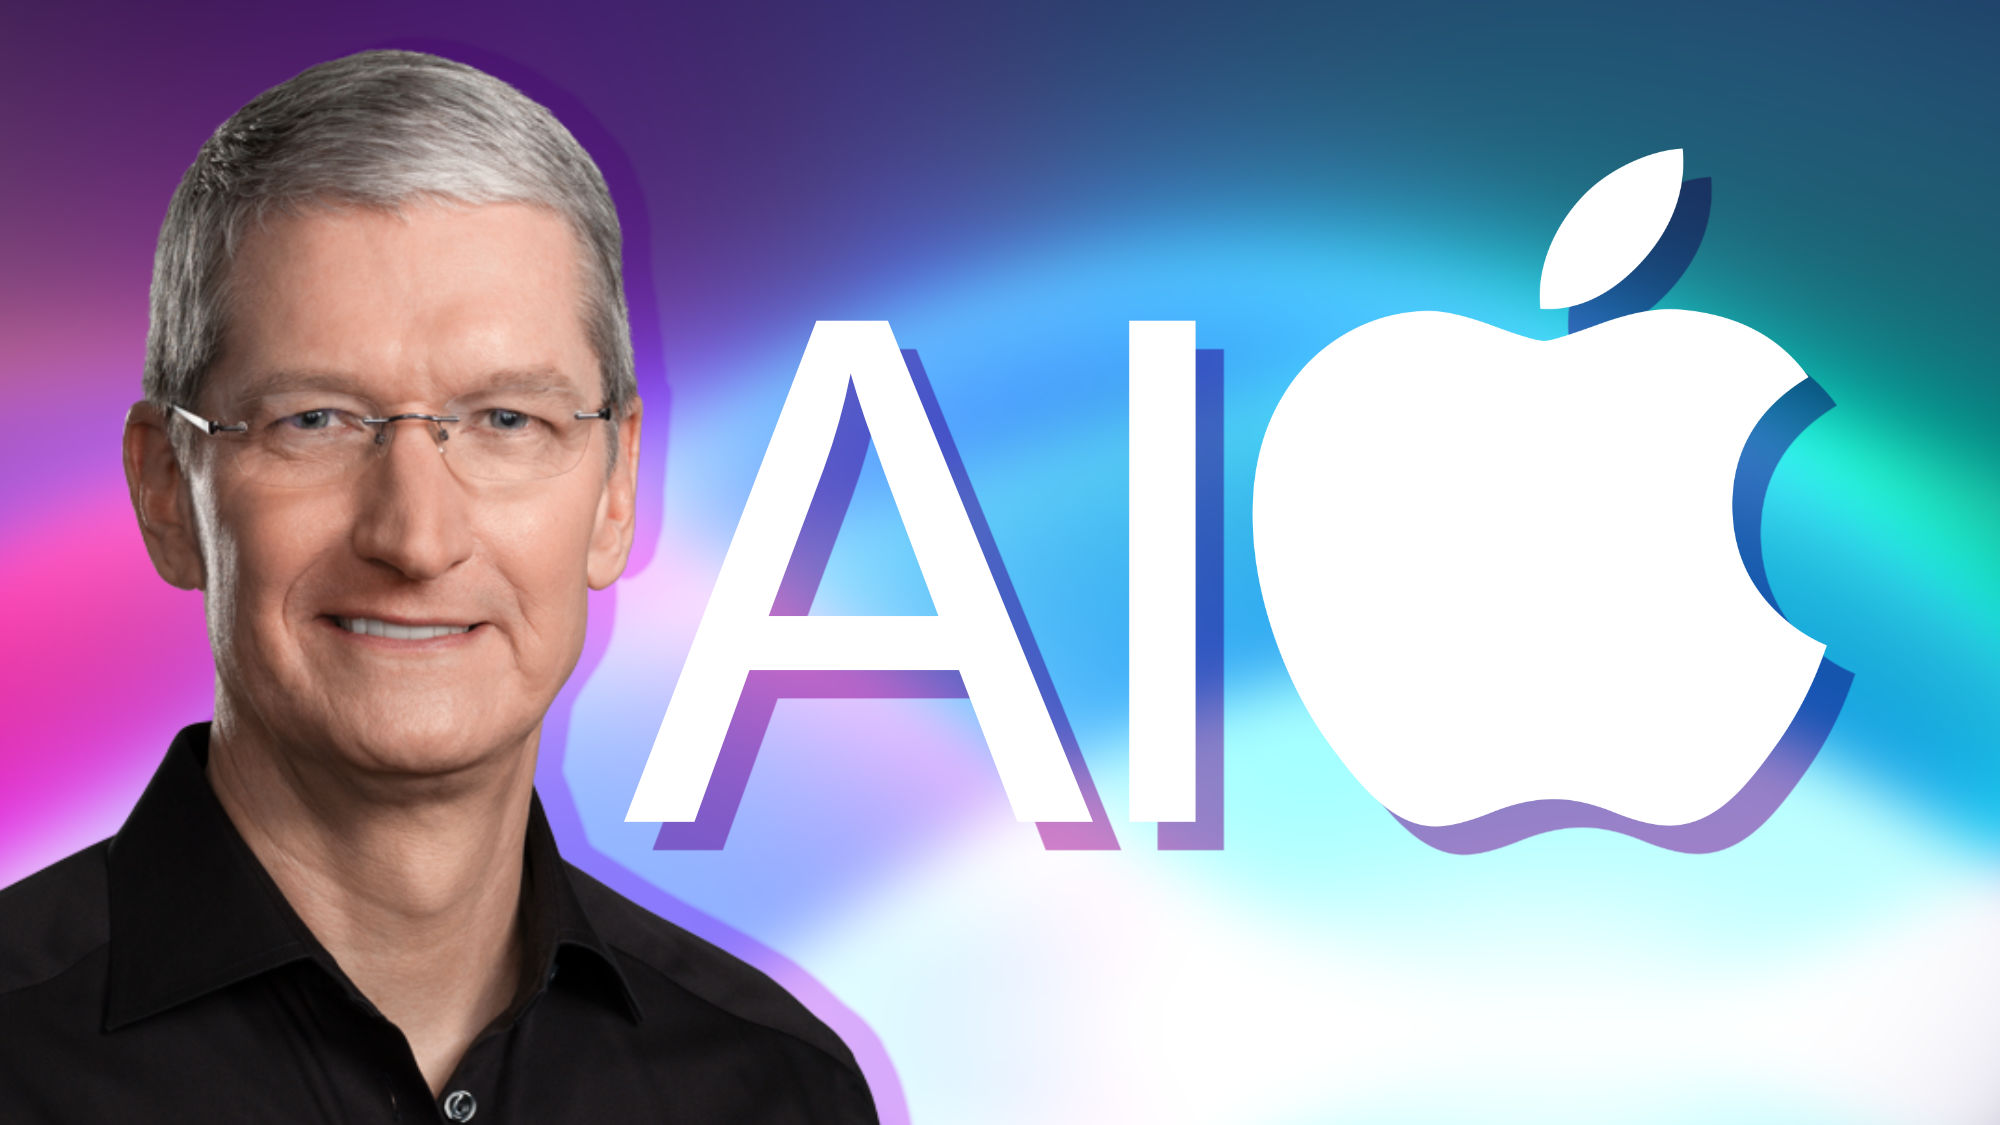 Apple has (quietly) introduced all these AIs: video creation, image modification, Spotlight, Xcode, and much more